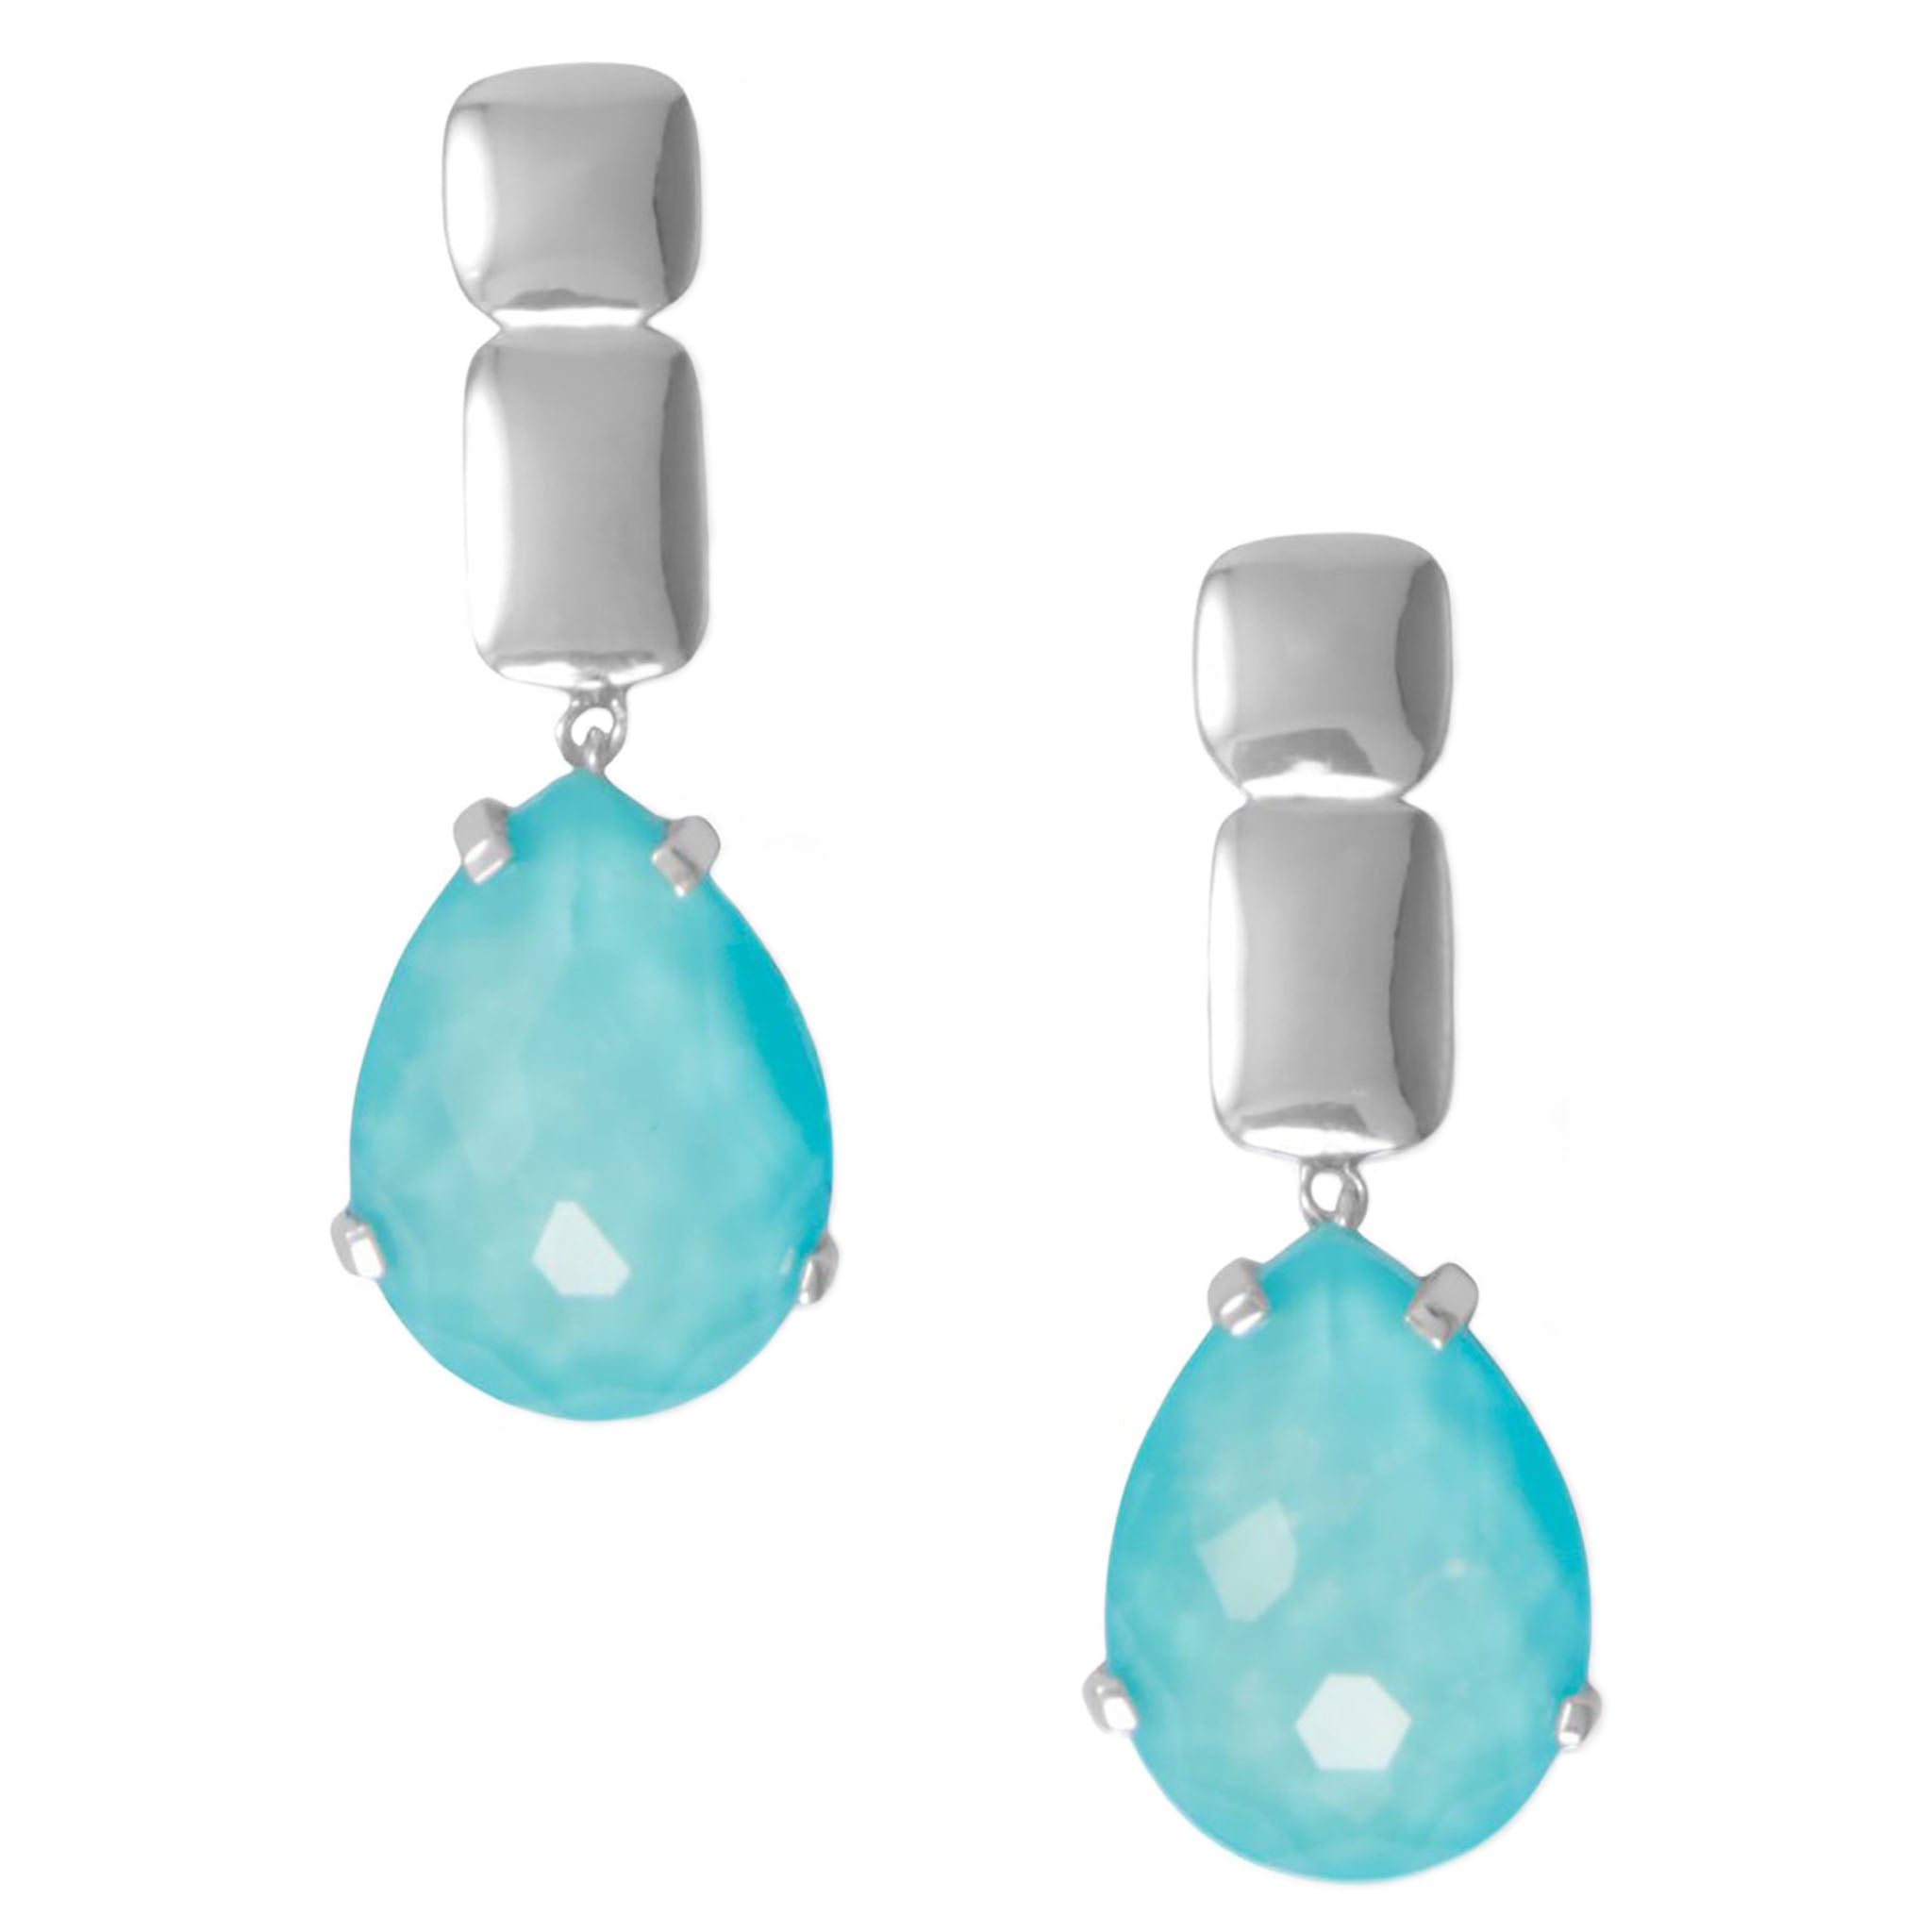 Turquoise and Quartz Doublet Earrings Blog